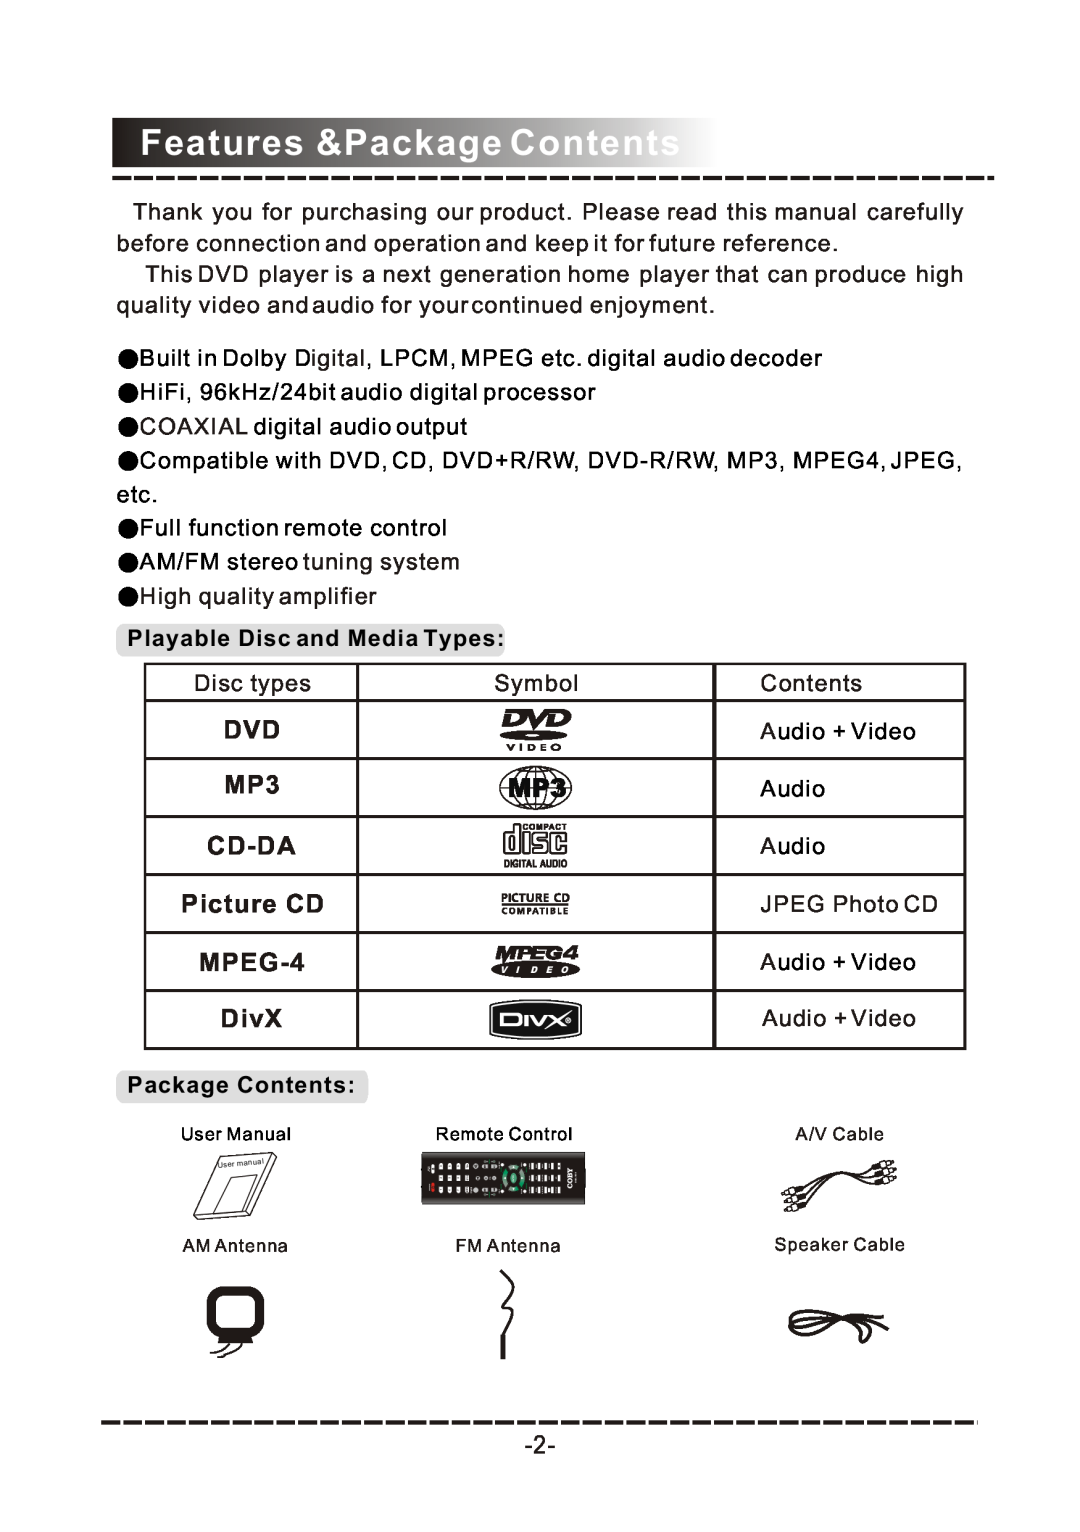 COBY electronic DVD-958 manual Features &Package Contents, Cd-Da, Picture CD, MPEG-4, DivX, Playable Disc and Media Types 